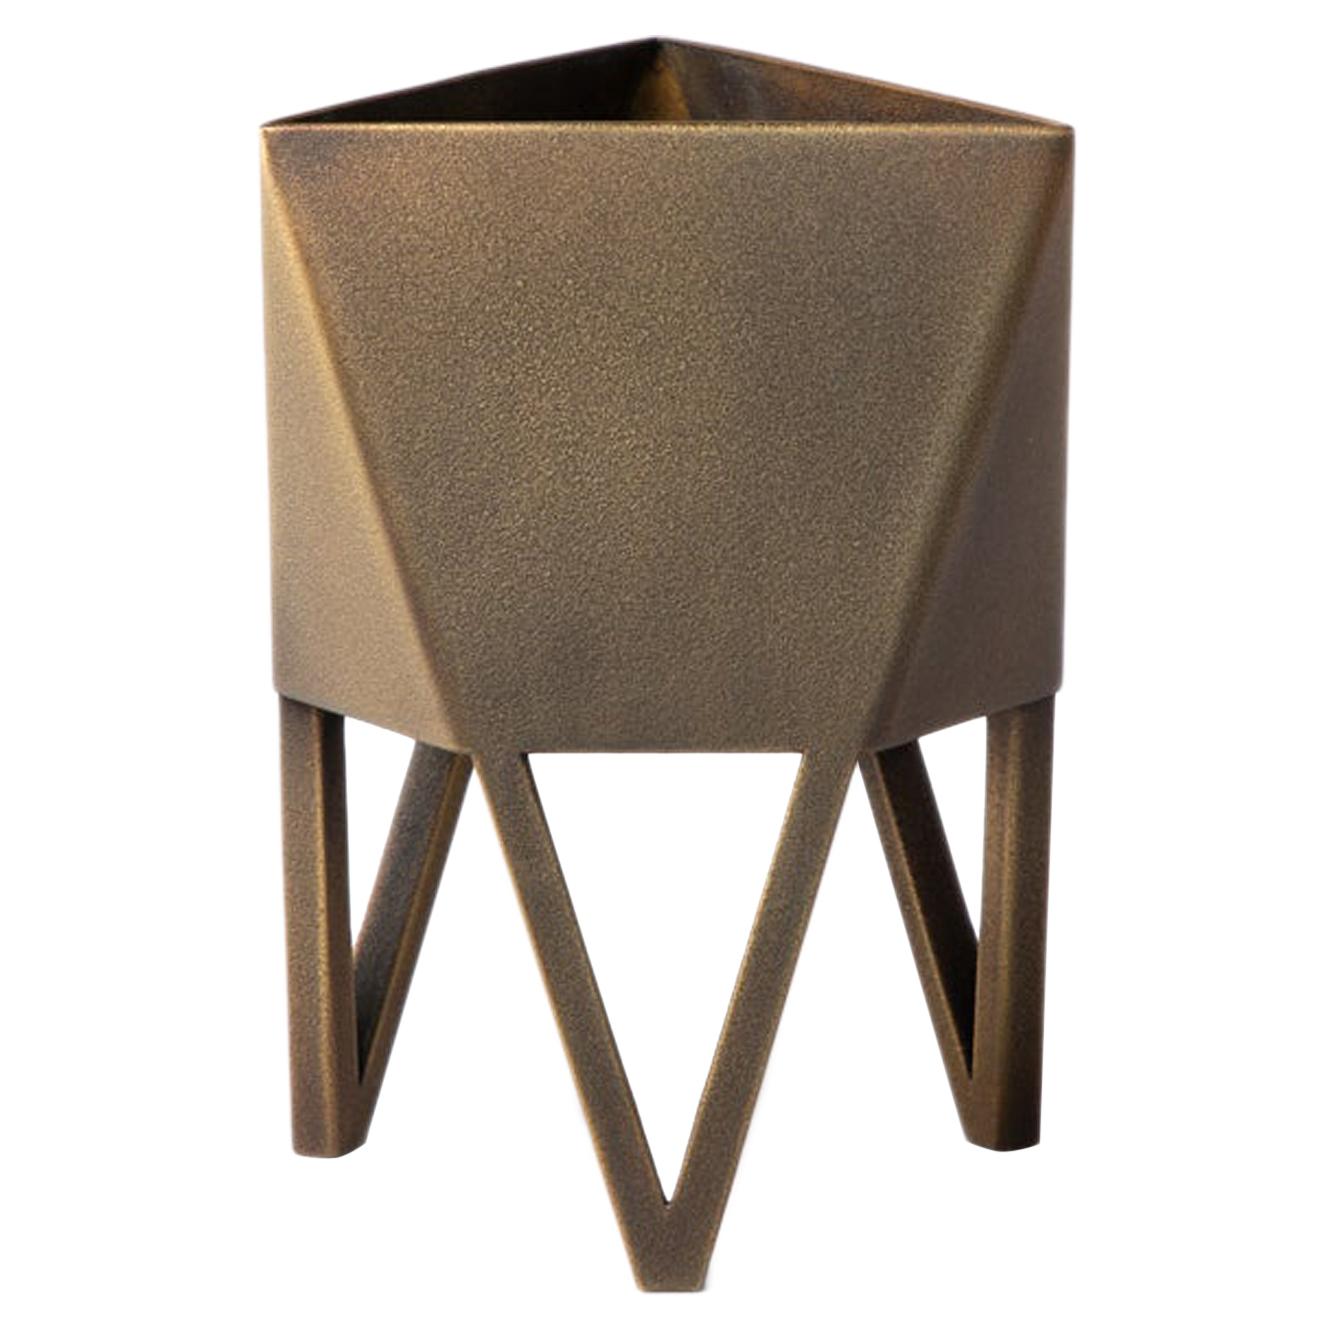 Medium Deca Planter in Brass by Force/Collide, 2021